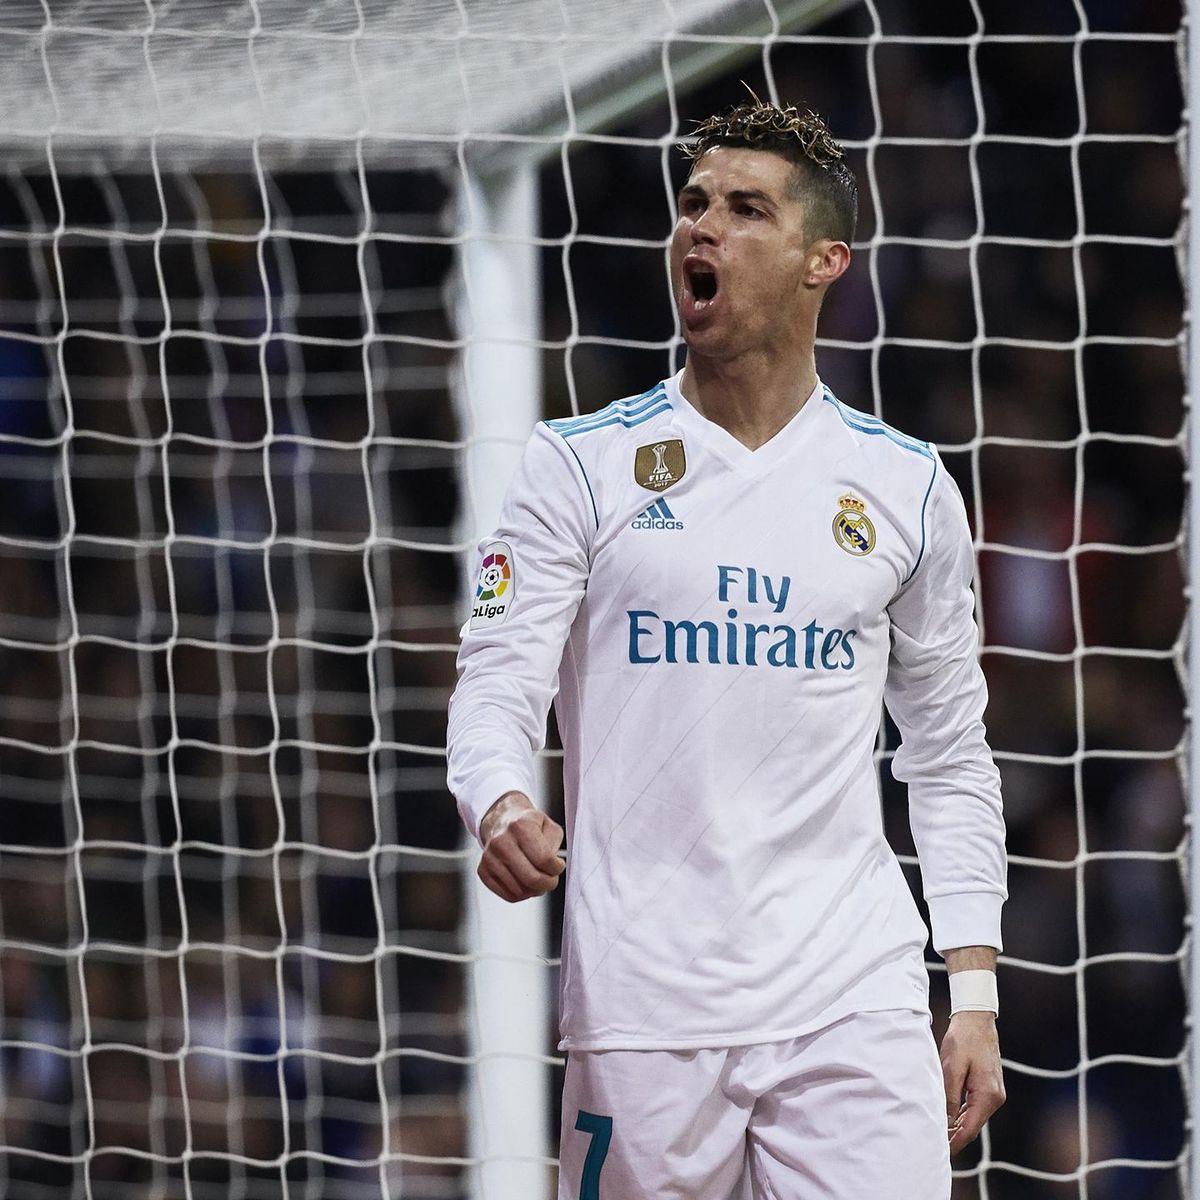 Outrageous' Cristiano Ronaldo has Messi in his sights -